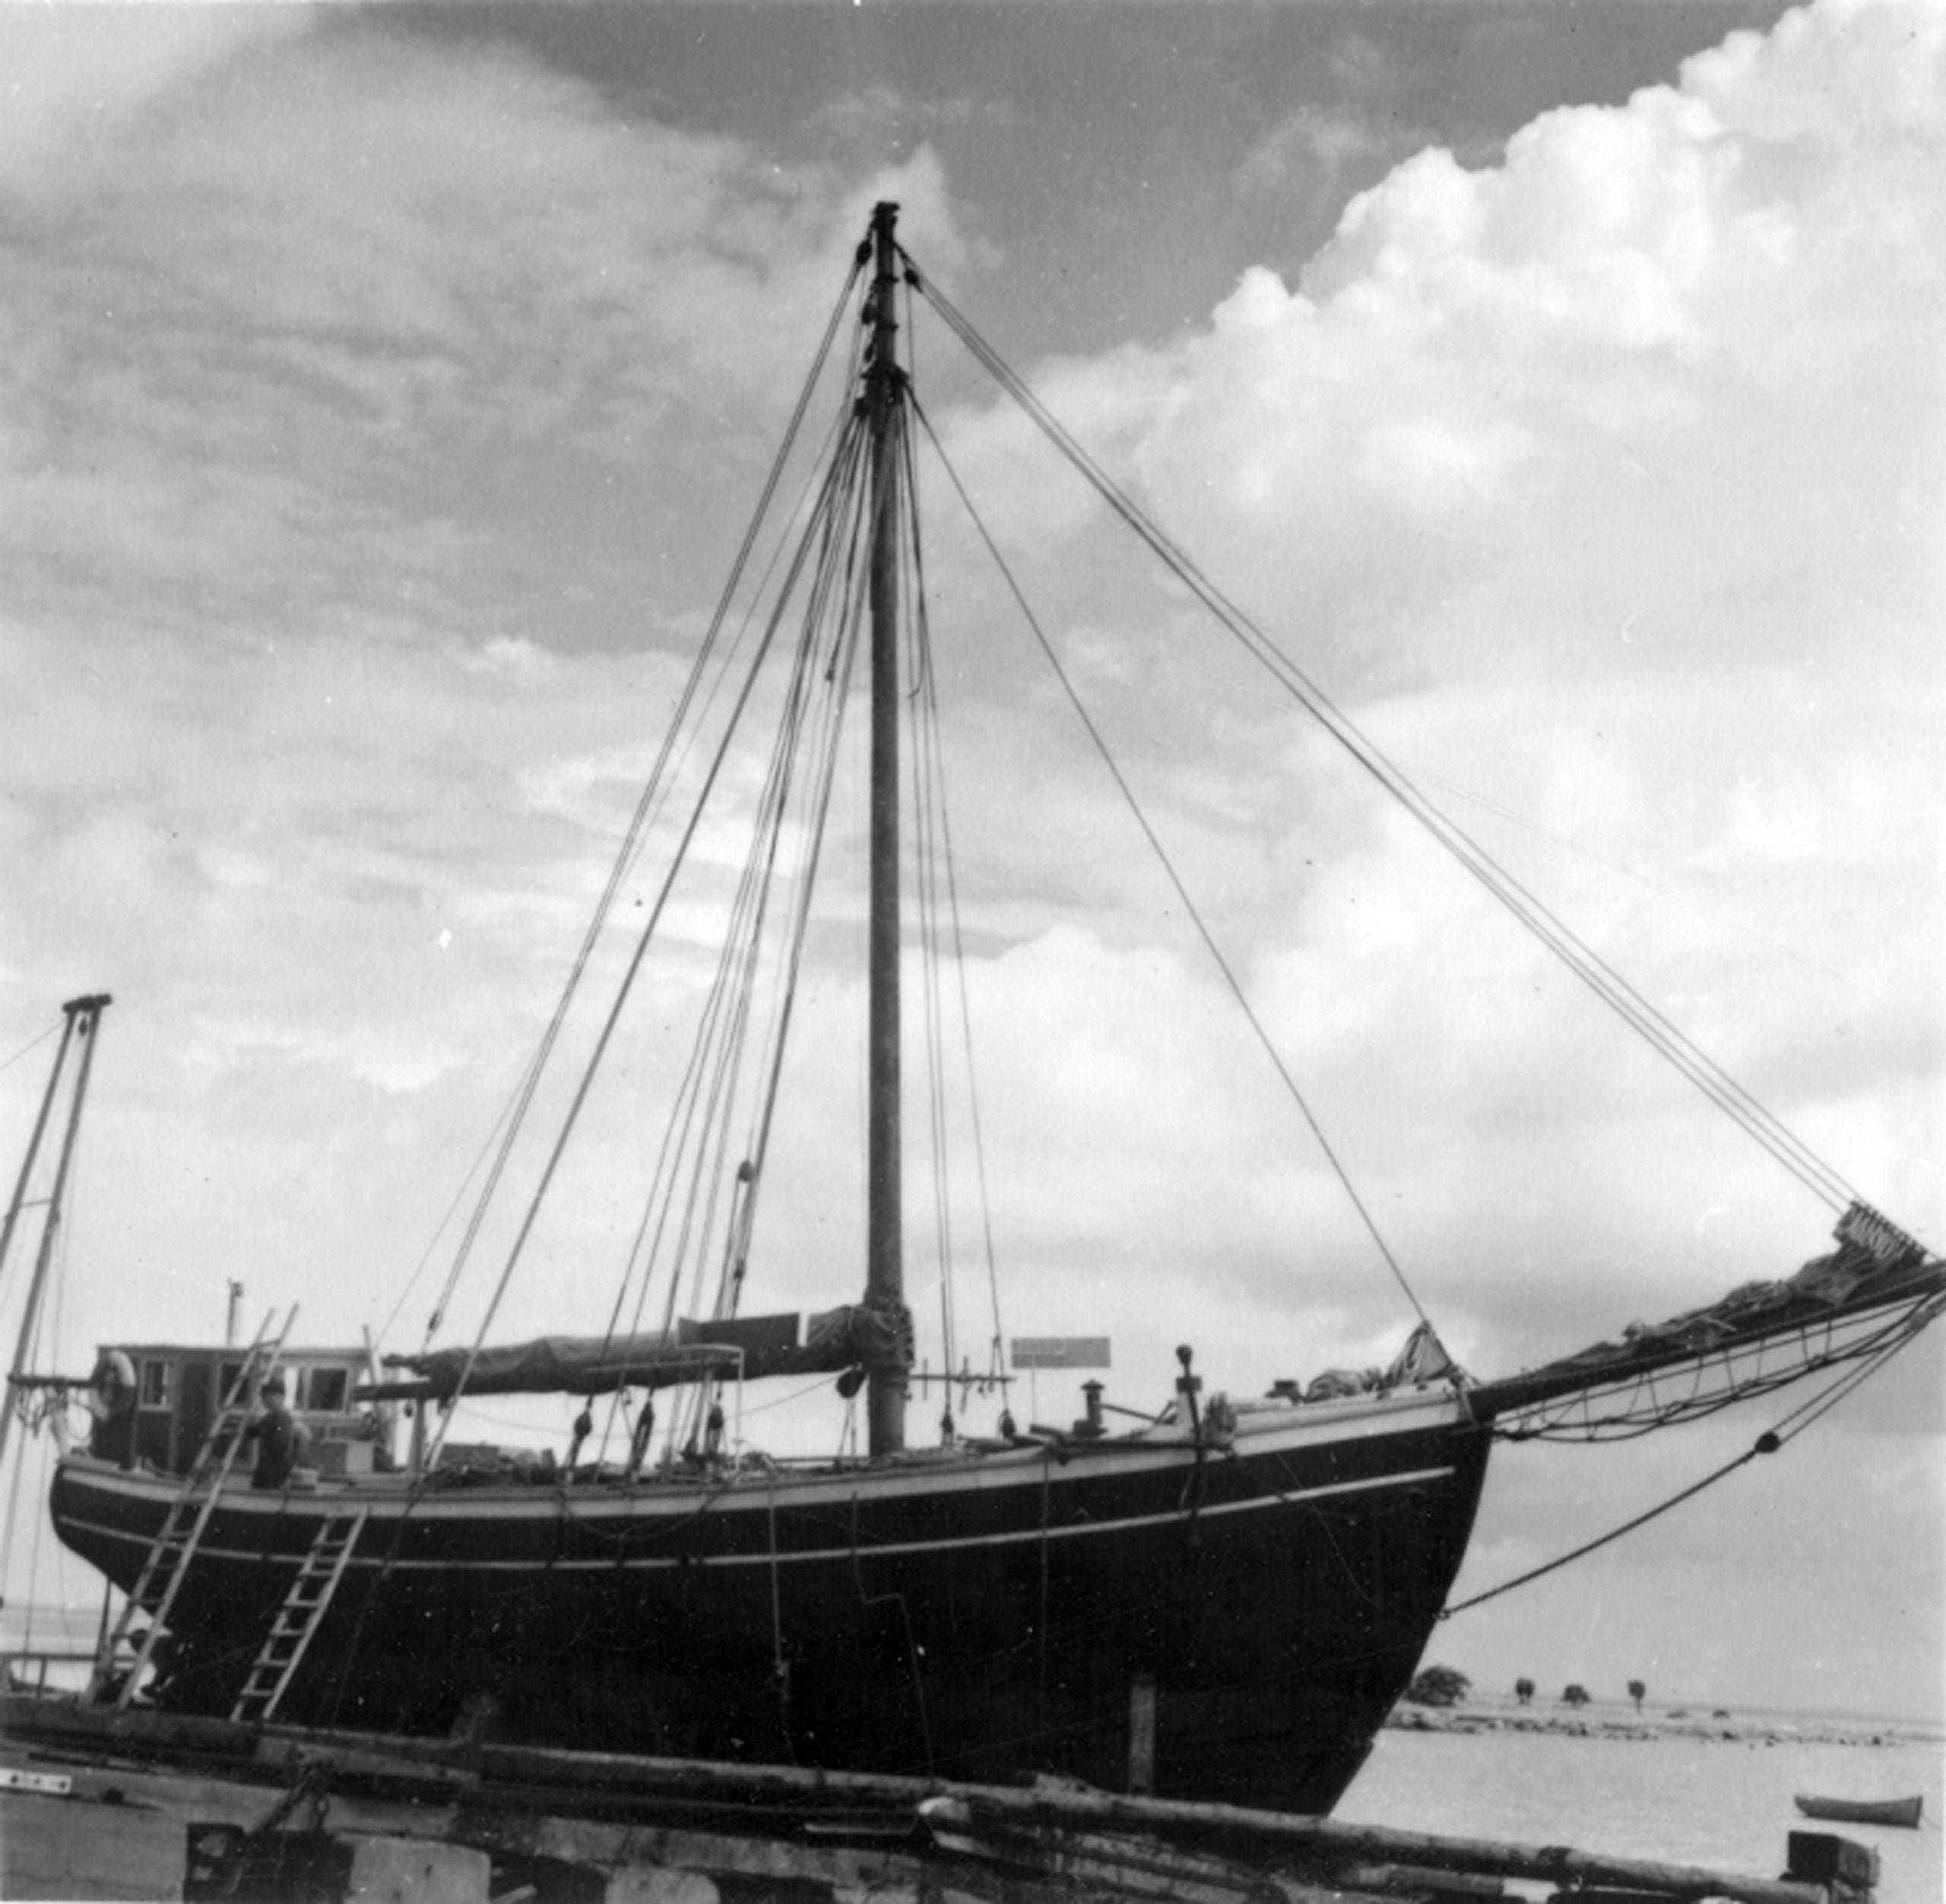 Historic Vessel Vega Could this be the Real Story